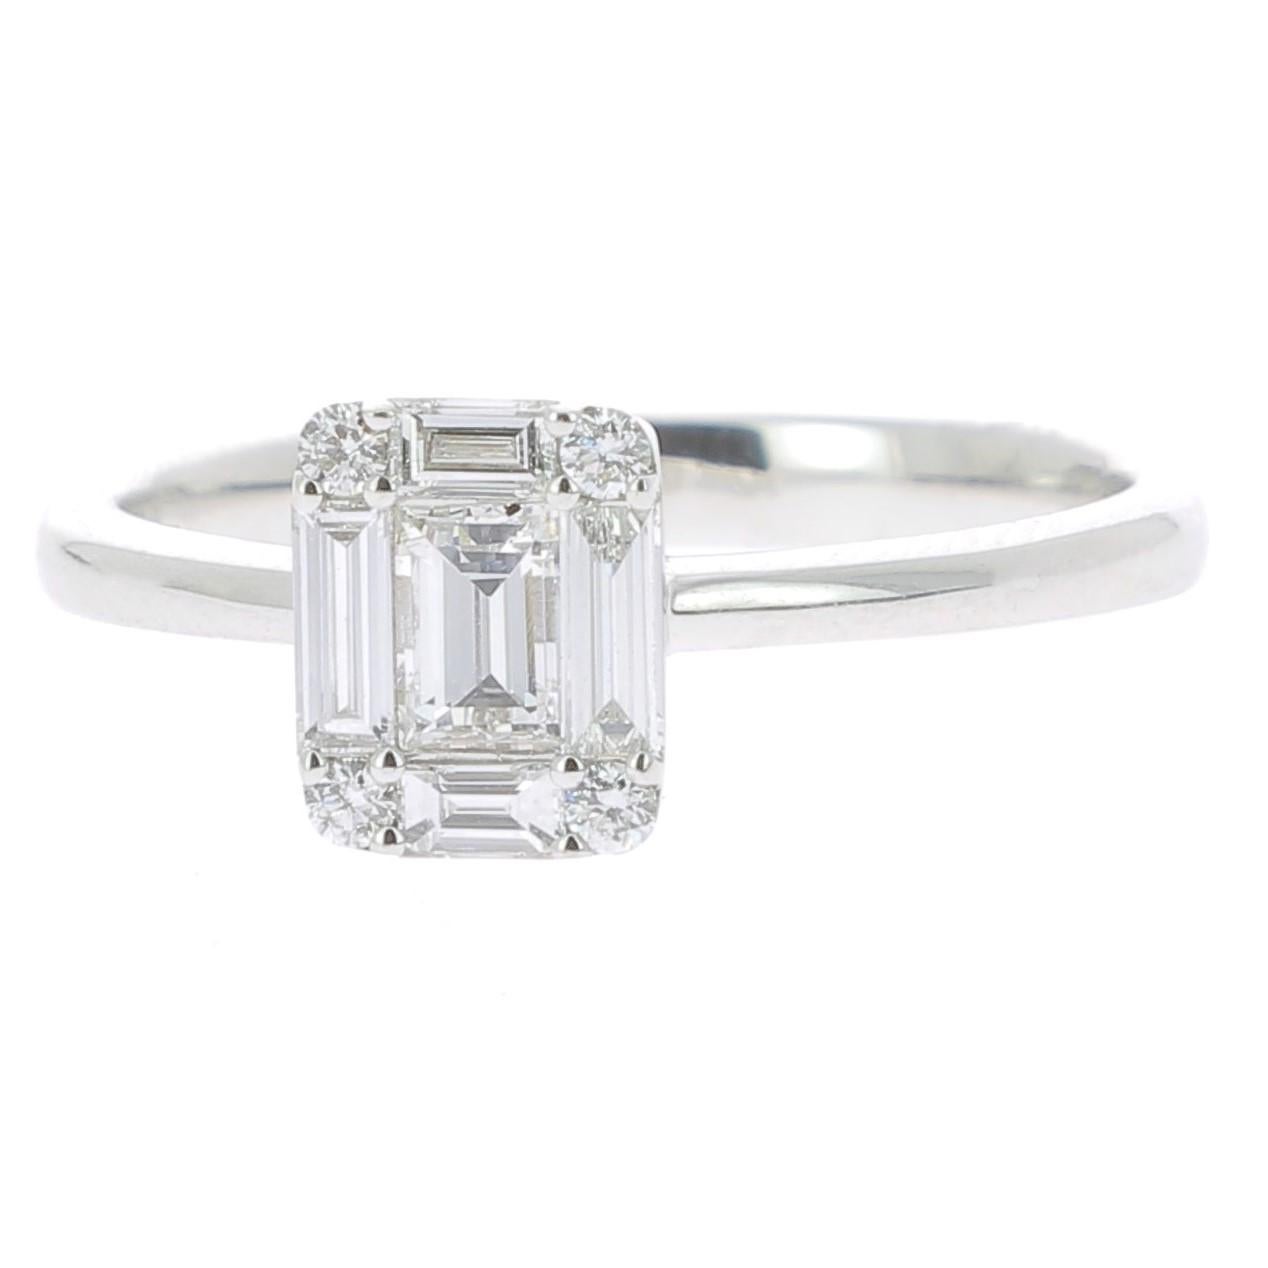 An unique Illusion Diamonds Ring set with Round Diamonds and Baguettes Diamonds giving the impression of One Emerald Cut Diamond.
The ring is set with 5 Baguettes Diamonds weighing 0.42 Carat, 4 Round Diamonds weighing 0.06 Carat 
Totally the